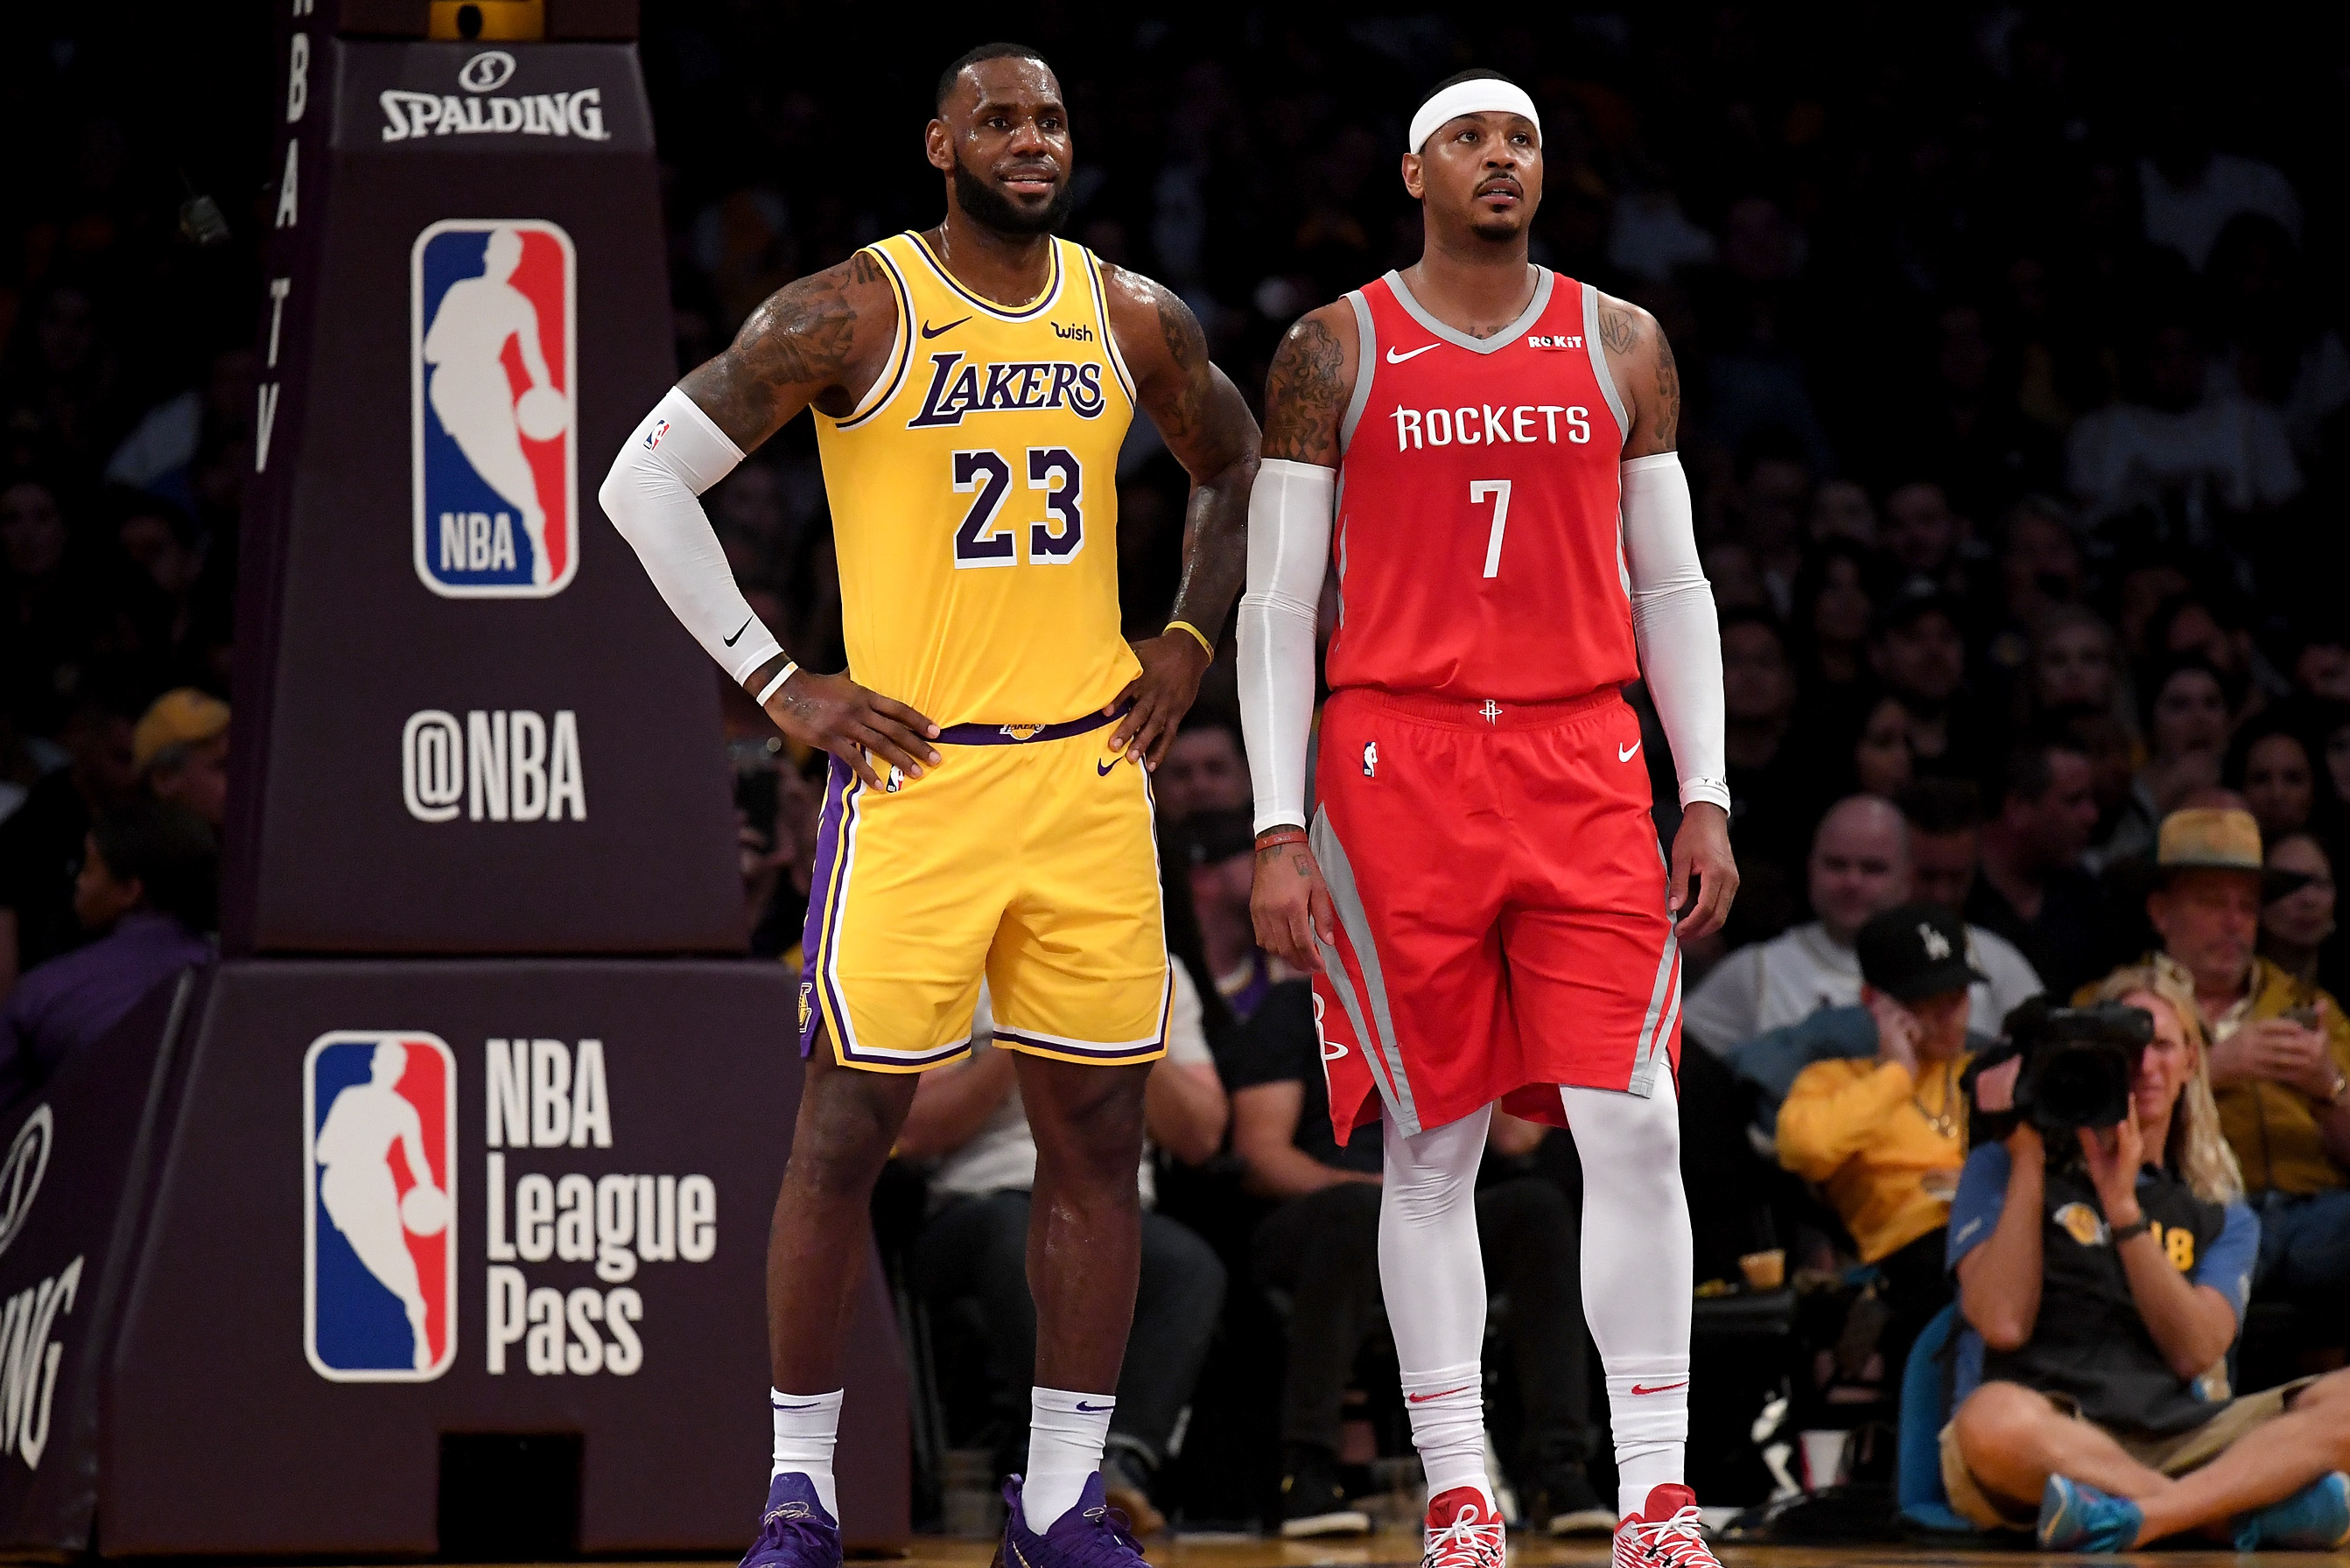 We will always be connected': LeBron James and Carmelo Anthony